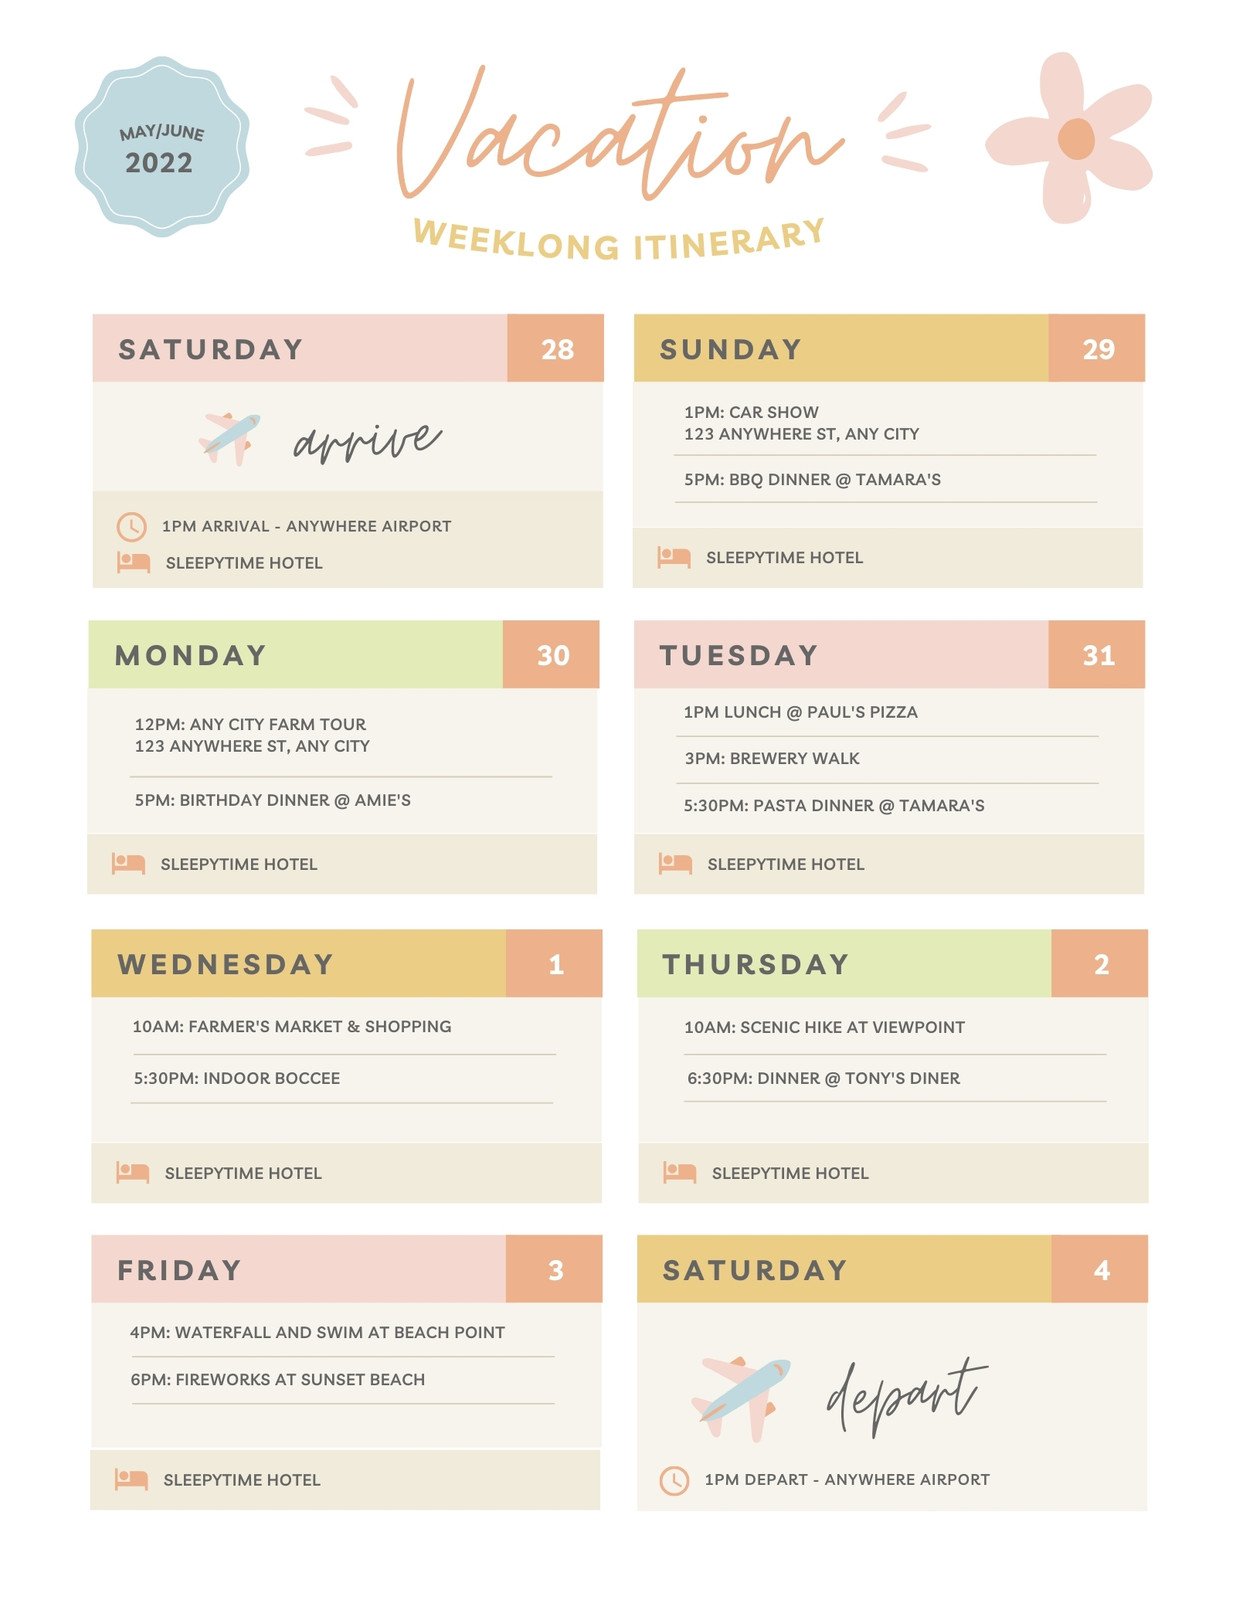 Colourful Aesthetic Vacation Itinerary Weekly Planner